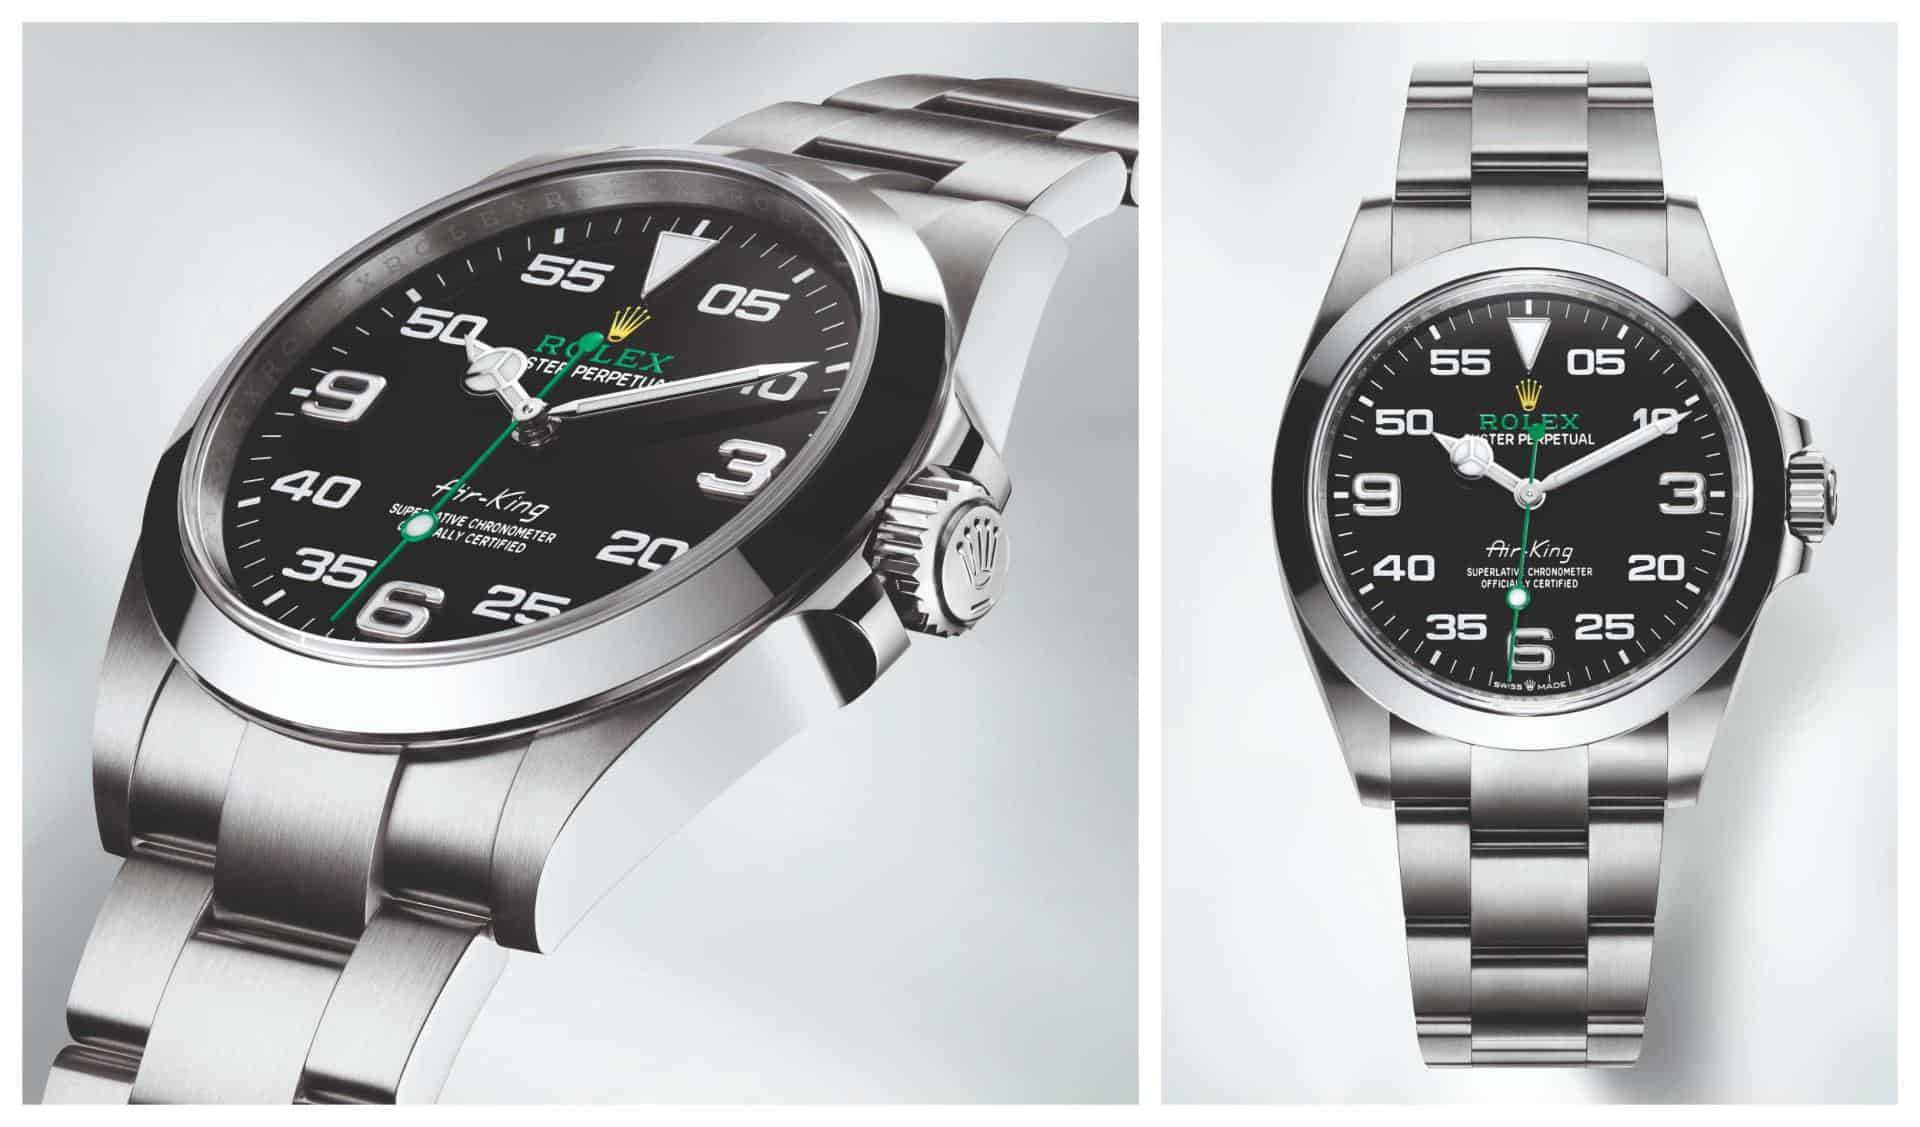 Rolex remains king but Hublot closes in on TAG Heuer in mixed year of sales  for LVMH watch brands